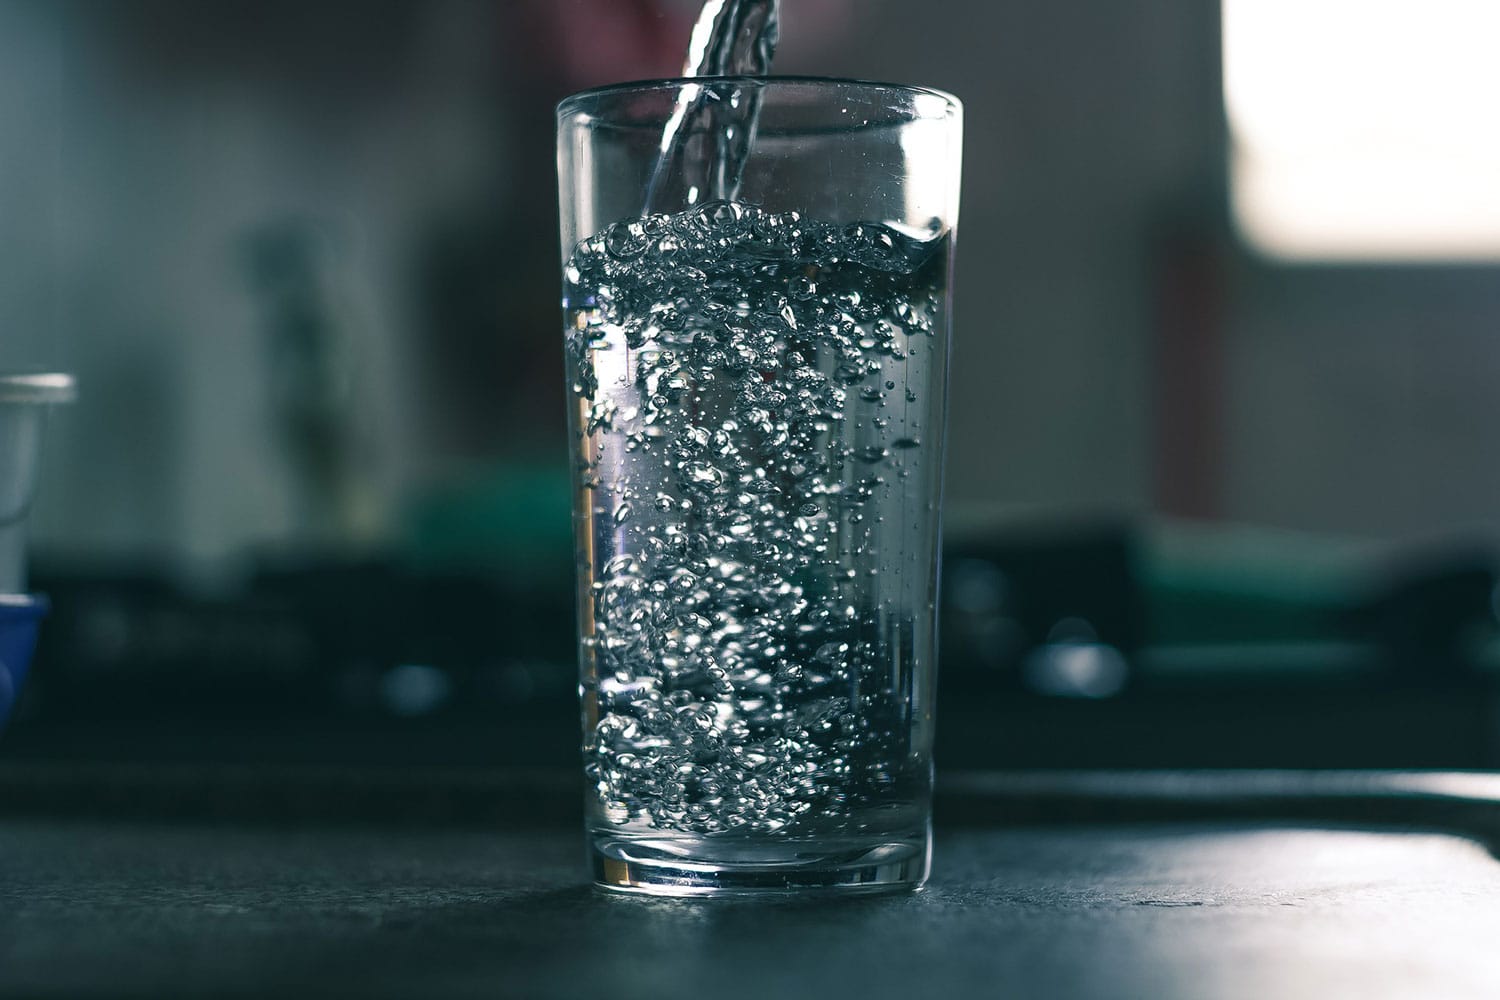 New water purification tech removes 99.9% of microplastics in 10 seconds